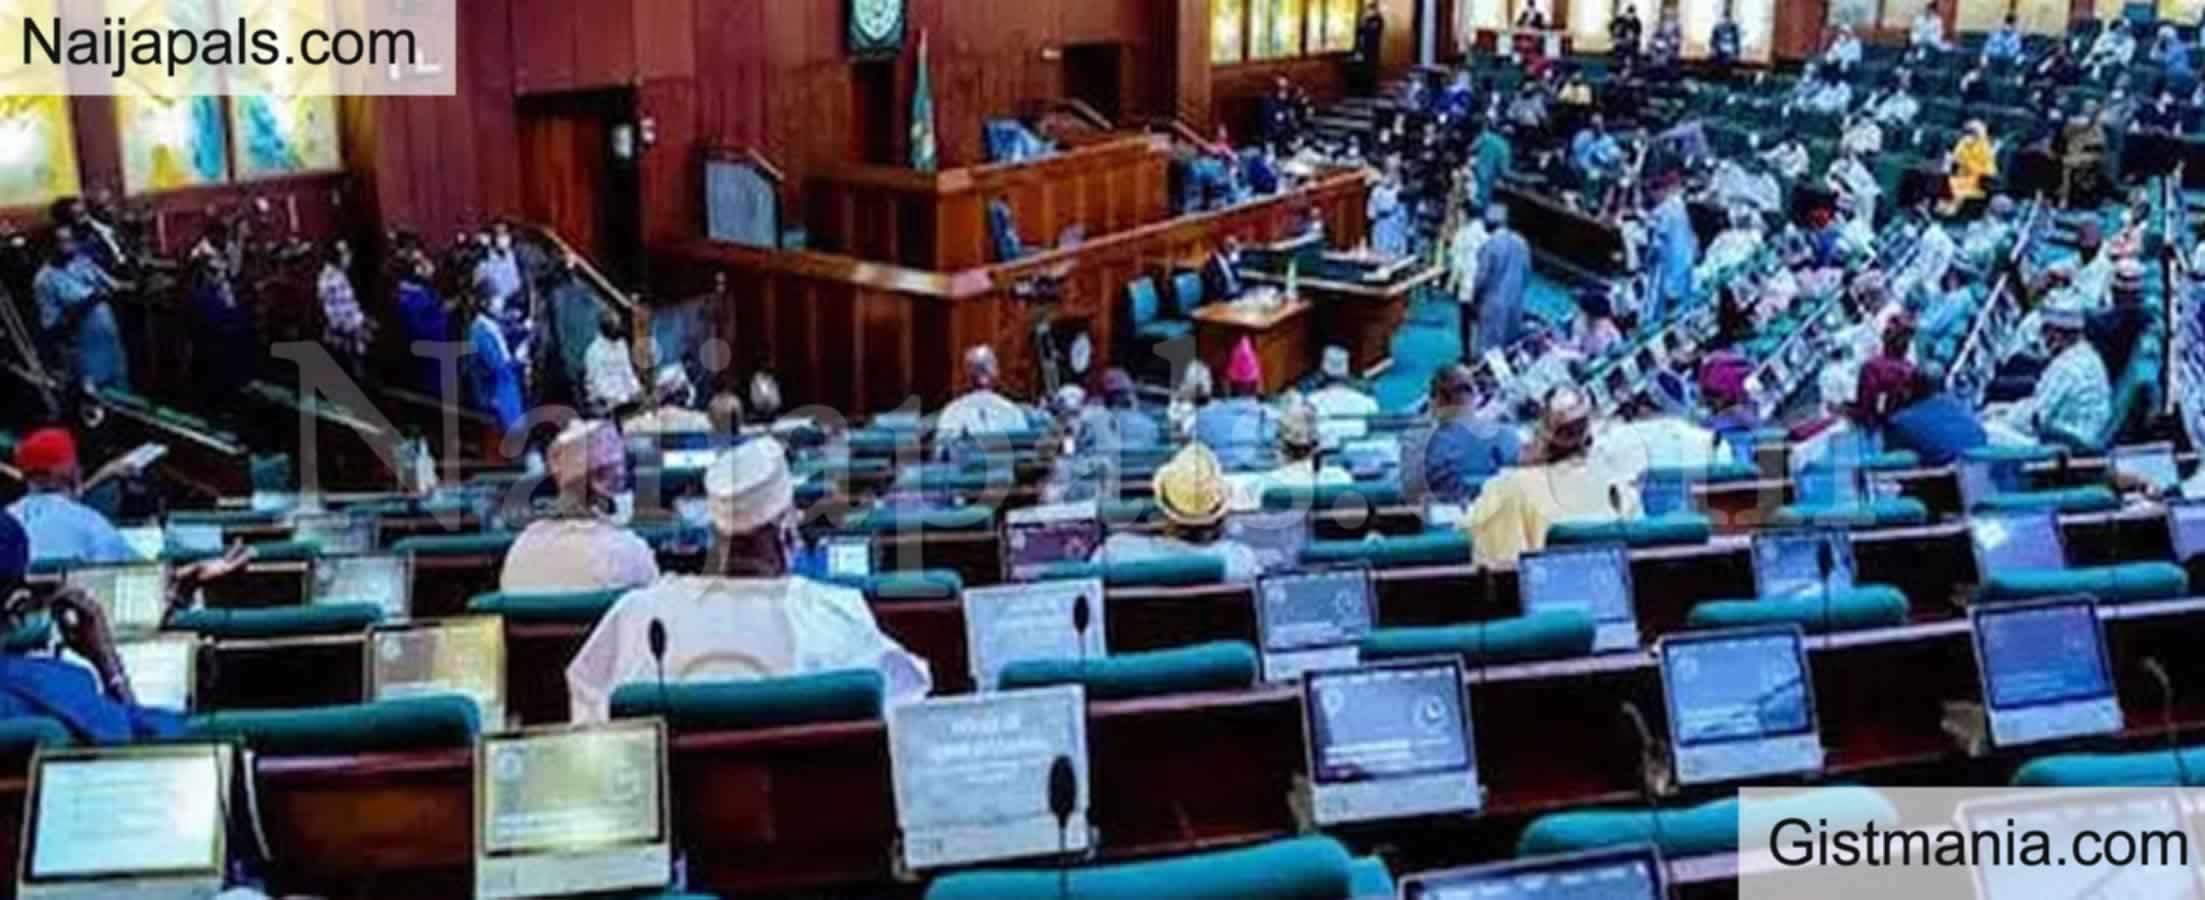 <img alt='.' class='lazyload' data-src='https://img.gistmania.com/emot/comment.gif' /> <b>Reps Summons Emefiele,Others, Asks Emirates To Stop Planned Flight Suspension Over Trapped $85M</b>